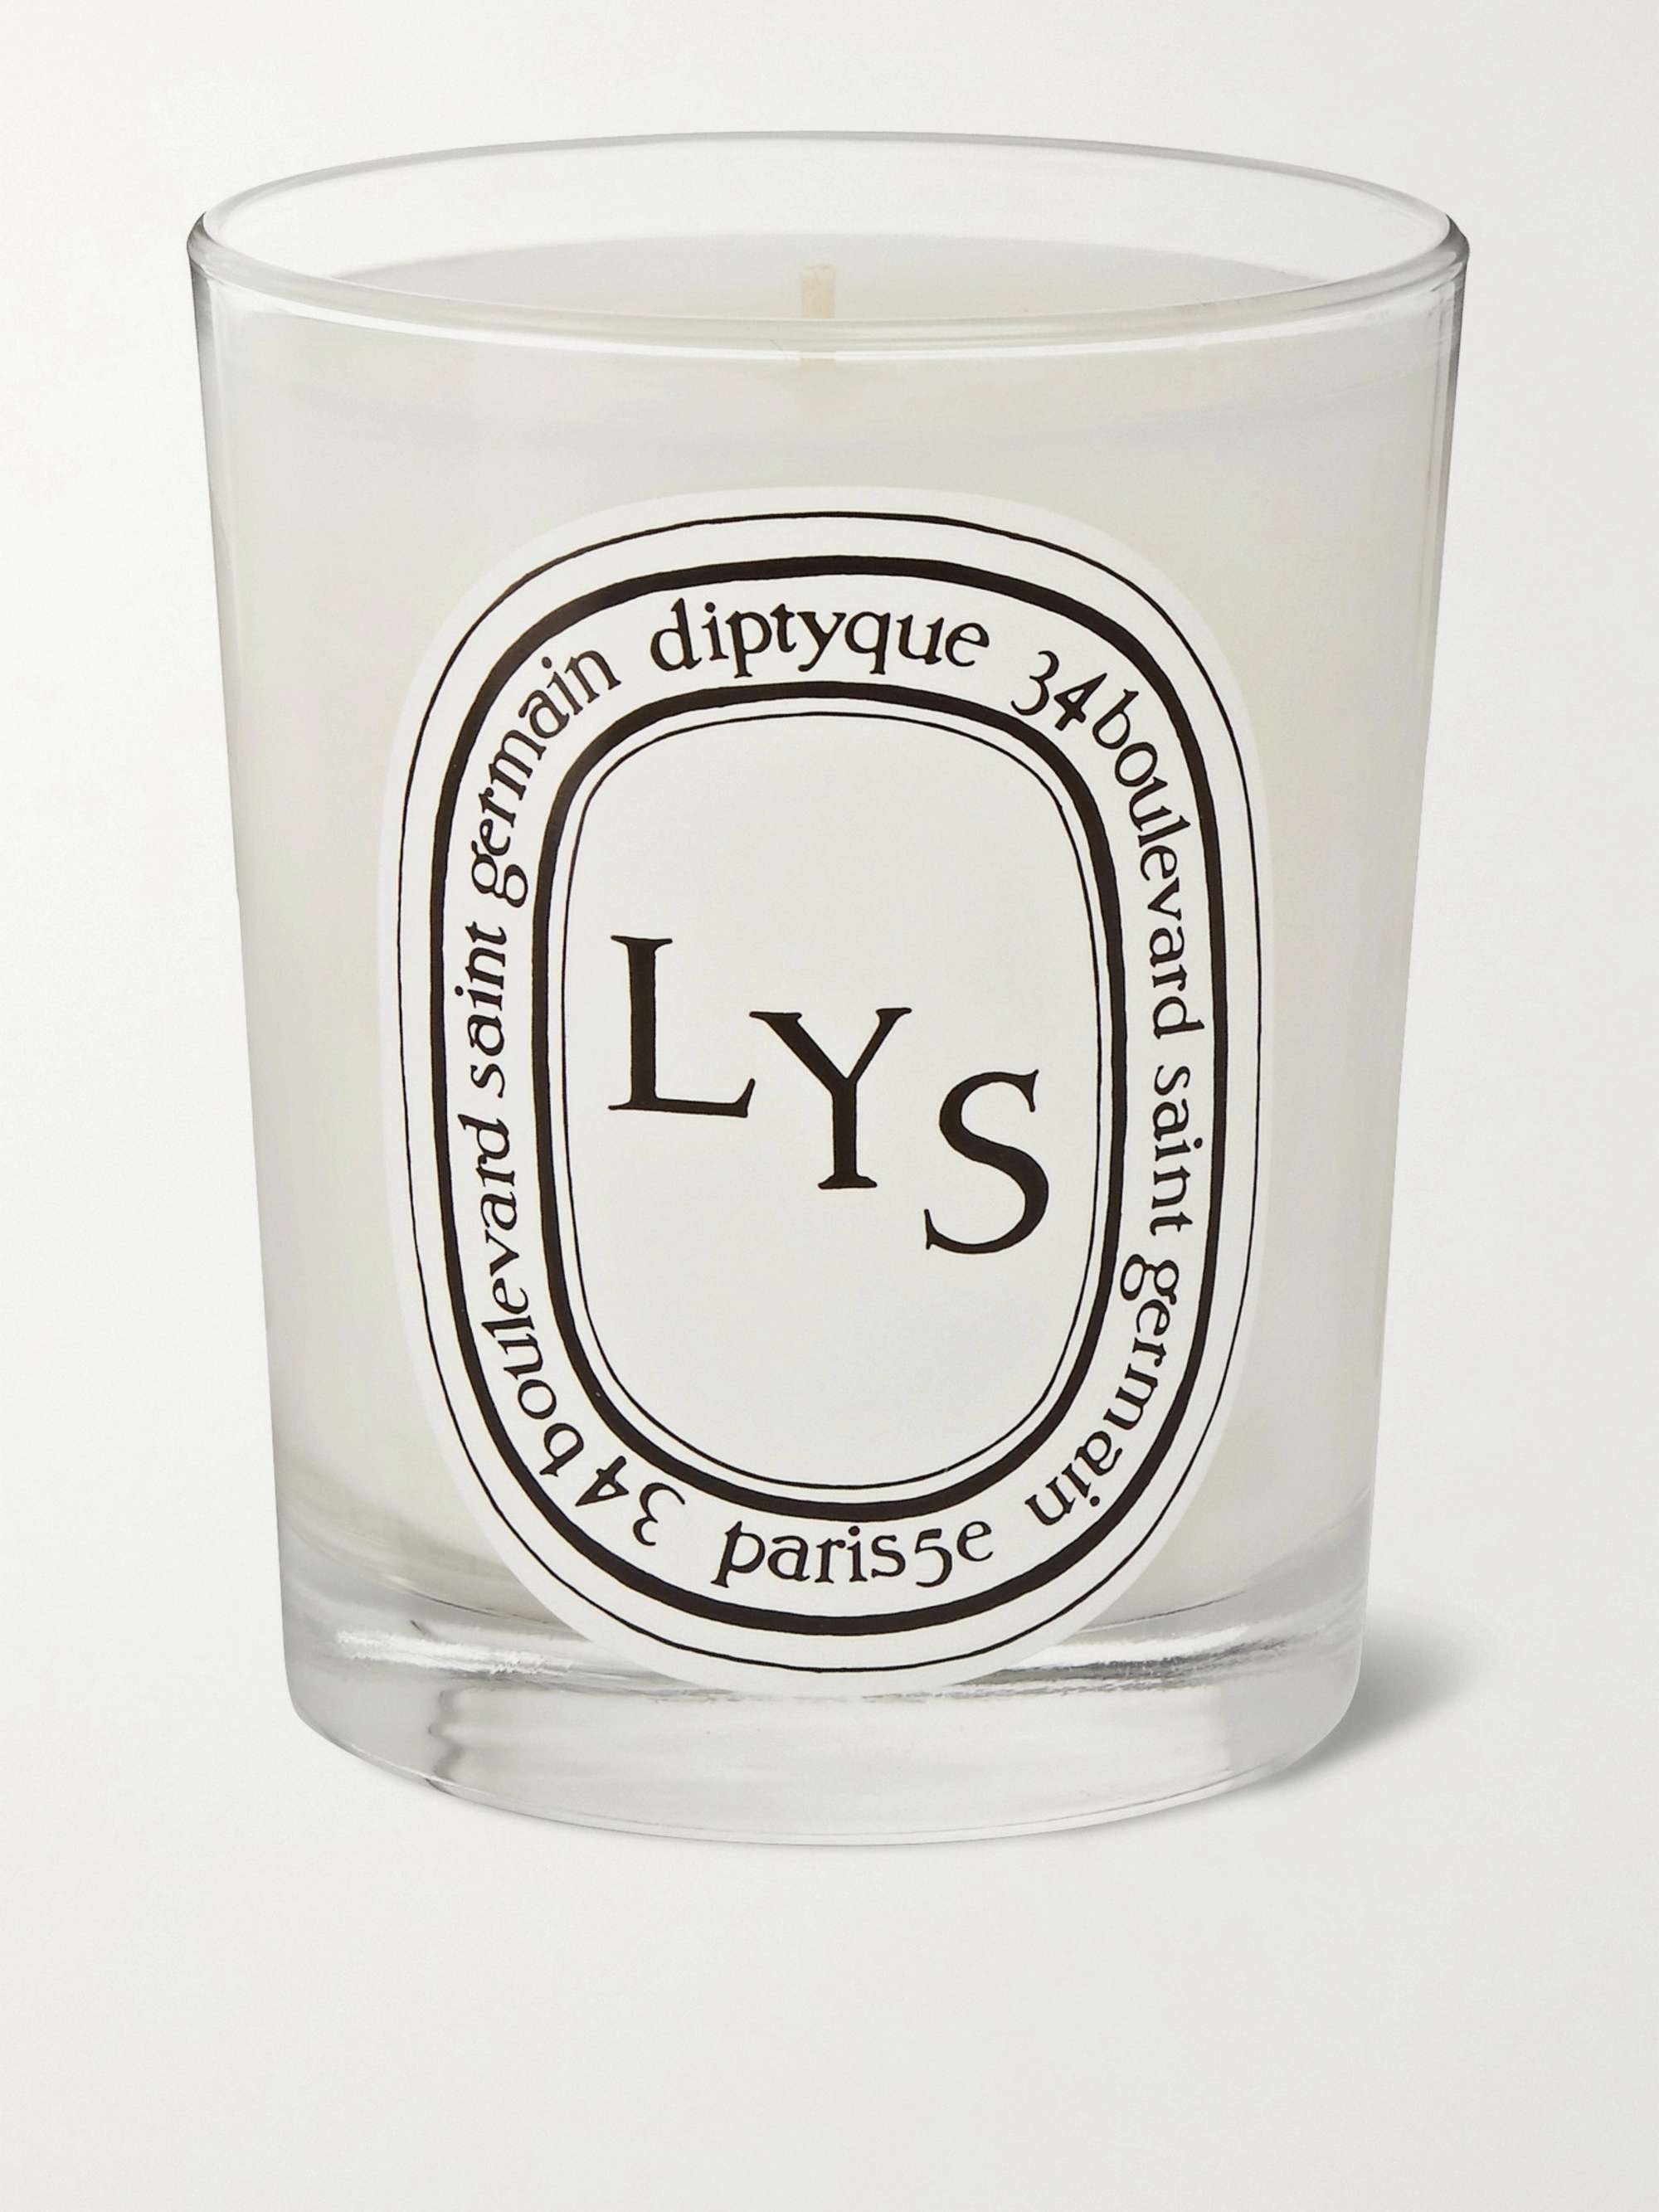 DIPTYQUE Jasmin Scented Candle, 190g